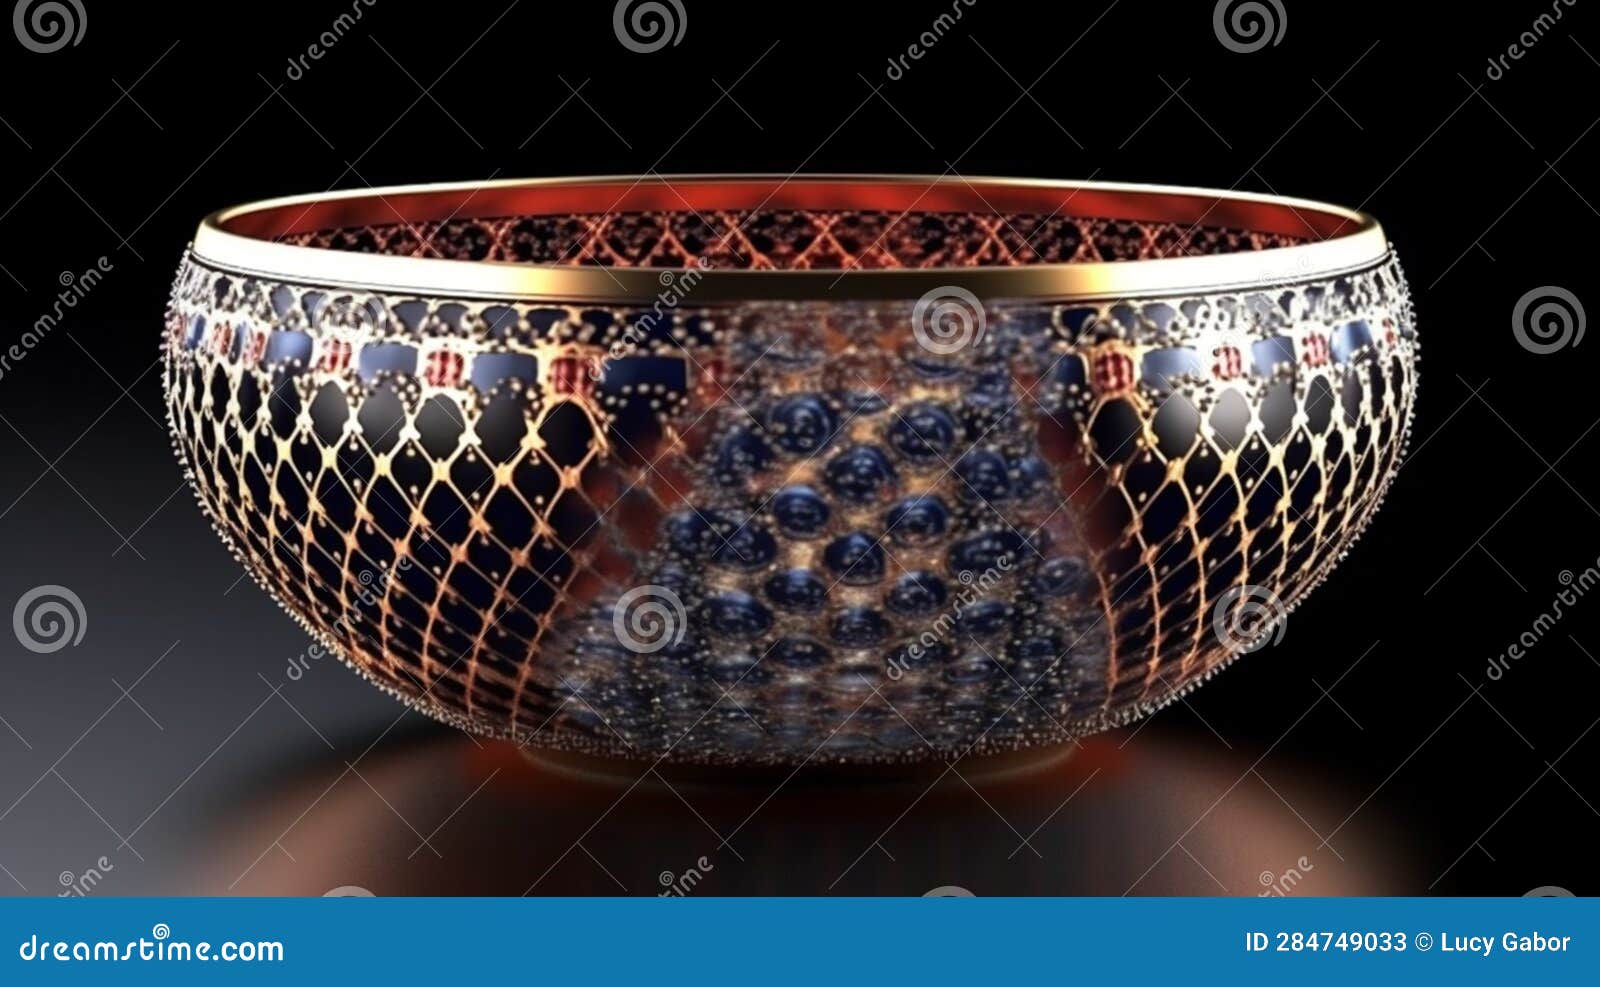 a small bowl with boheme decoration on black background